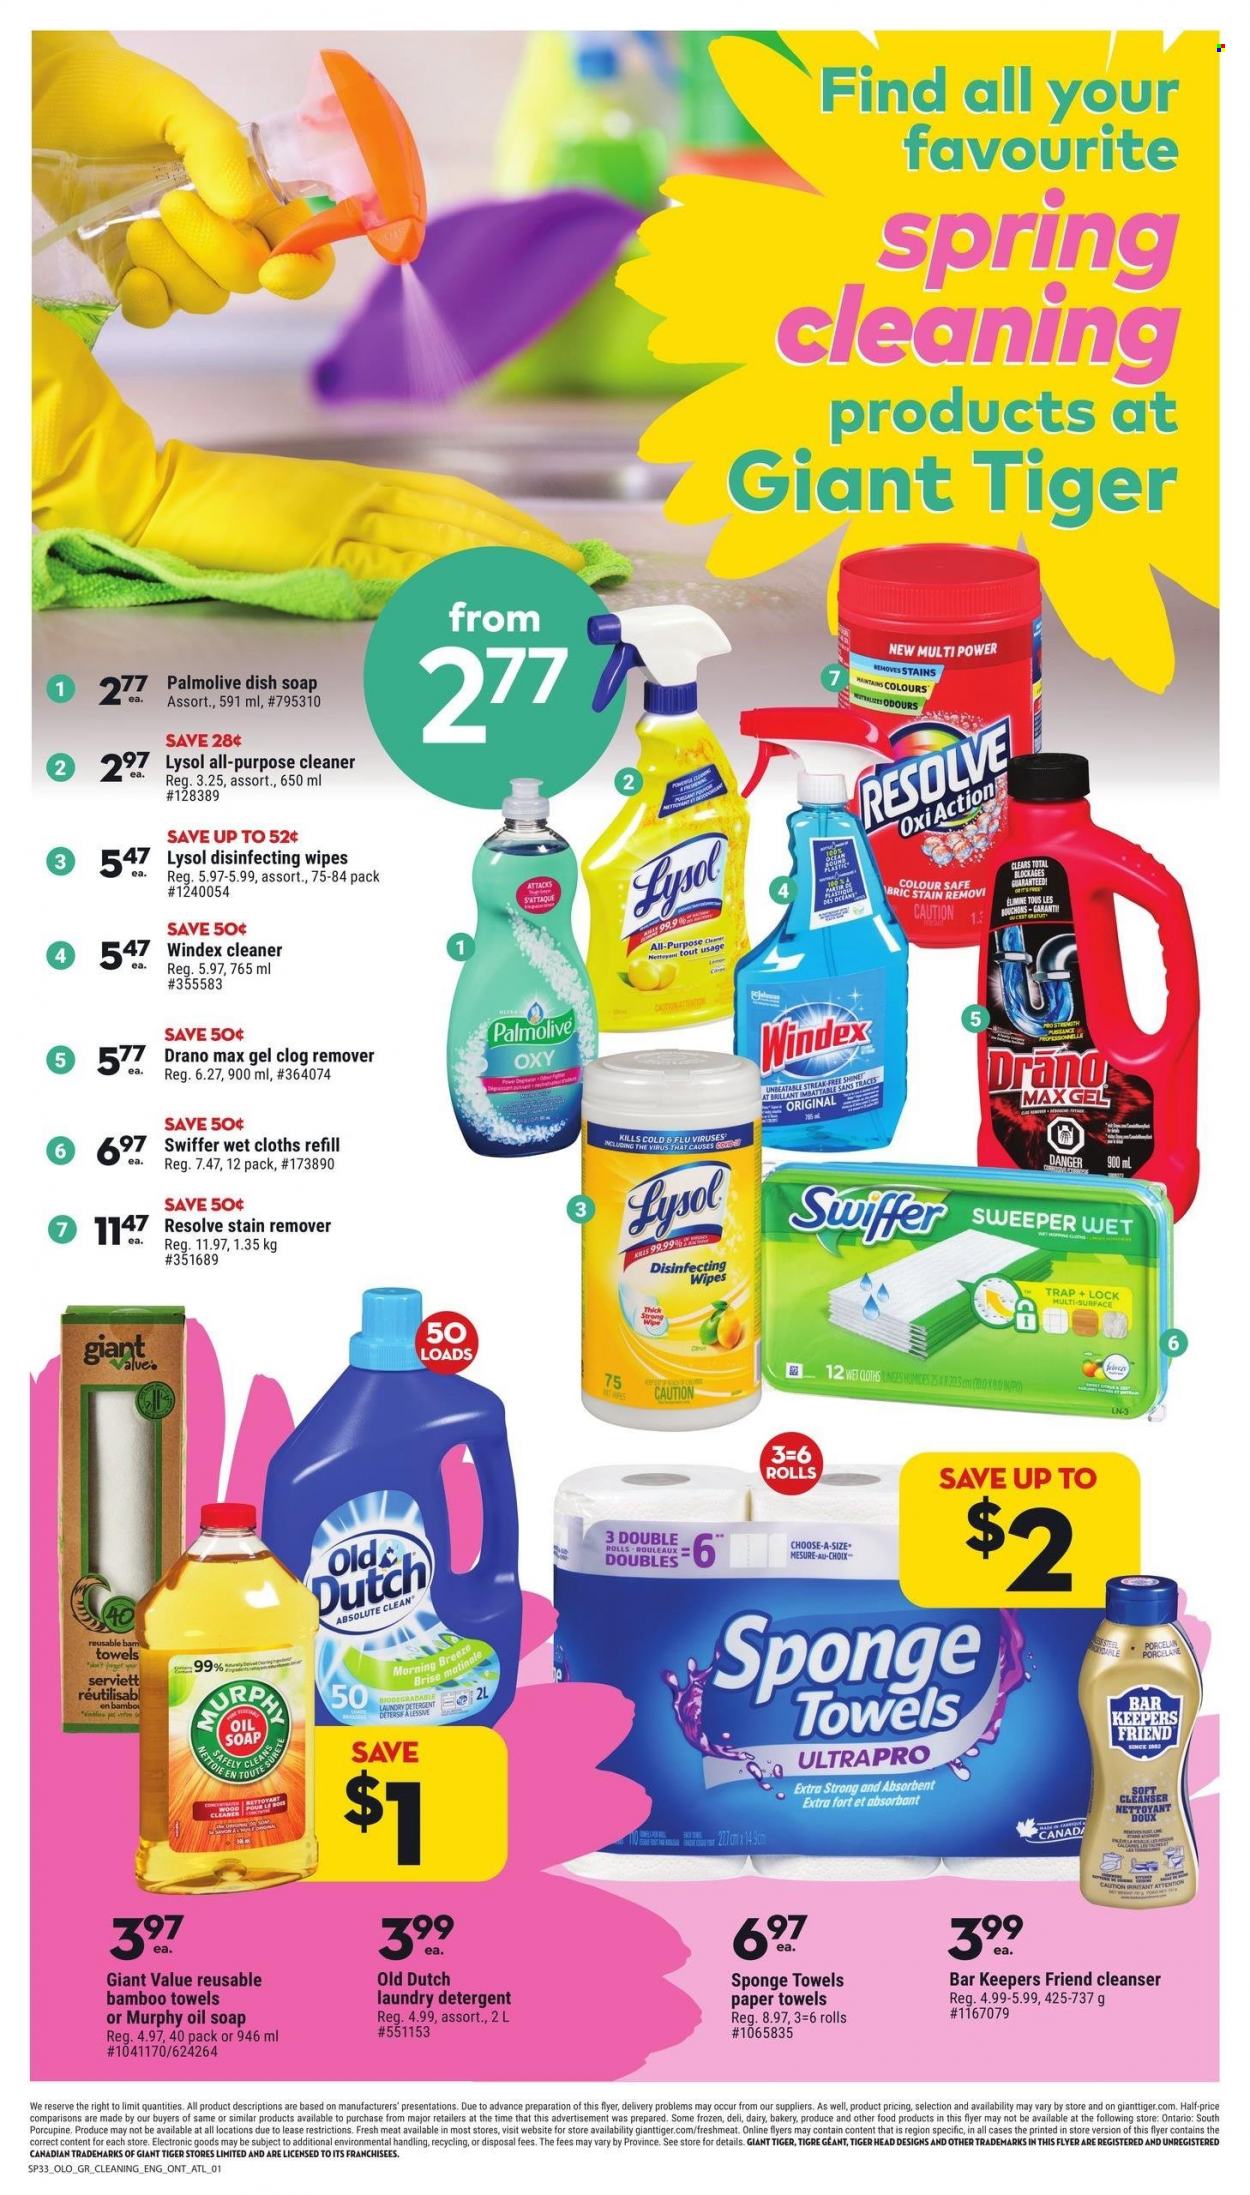 Giant Tiger Flyer - March 15, 2023 - March 21, 2023 - Sales products - wipes, kitchen towels, paper towels, Windex, cleaner, stain remover, Lizol, Swiffer, laundry detergent, Palmolive, soap, cleanser, Absolute, sponge, detergent. Page 4.